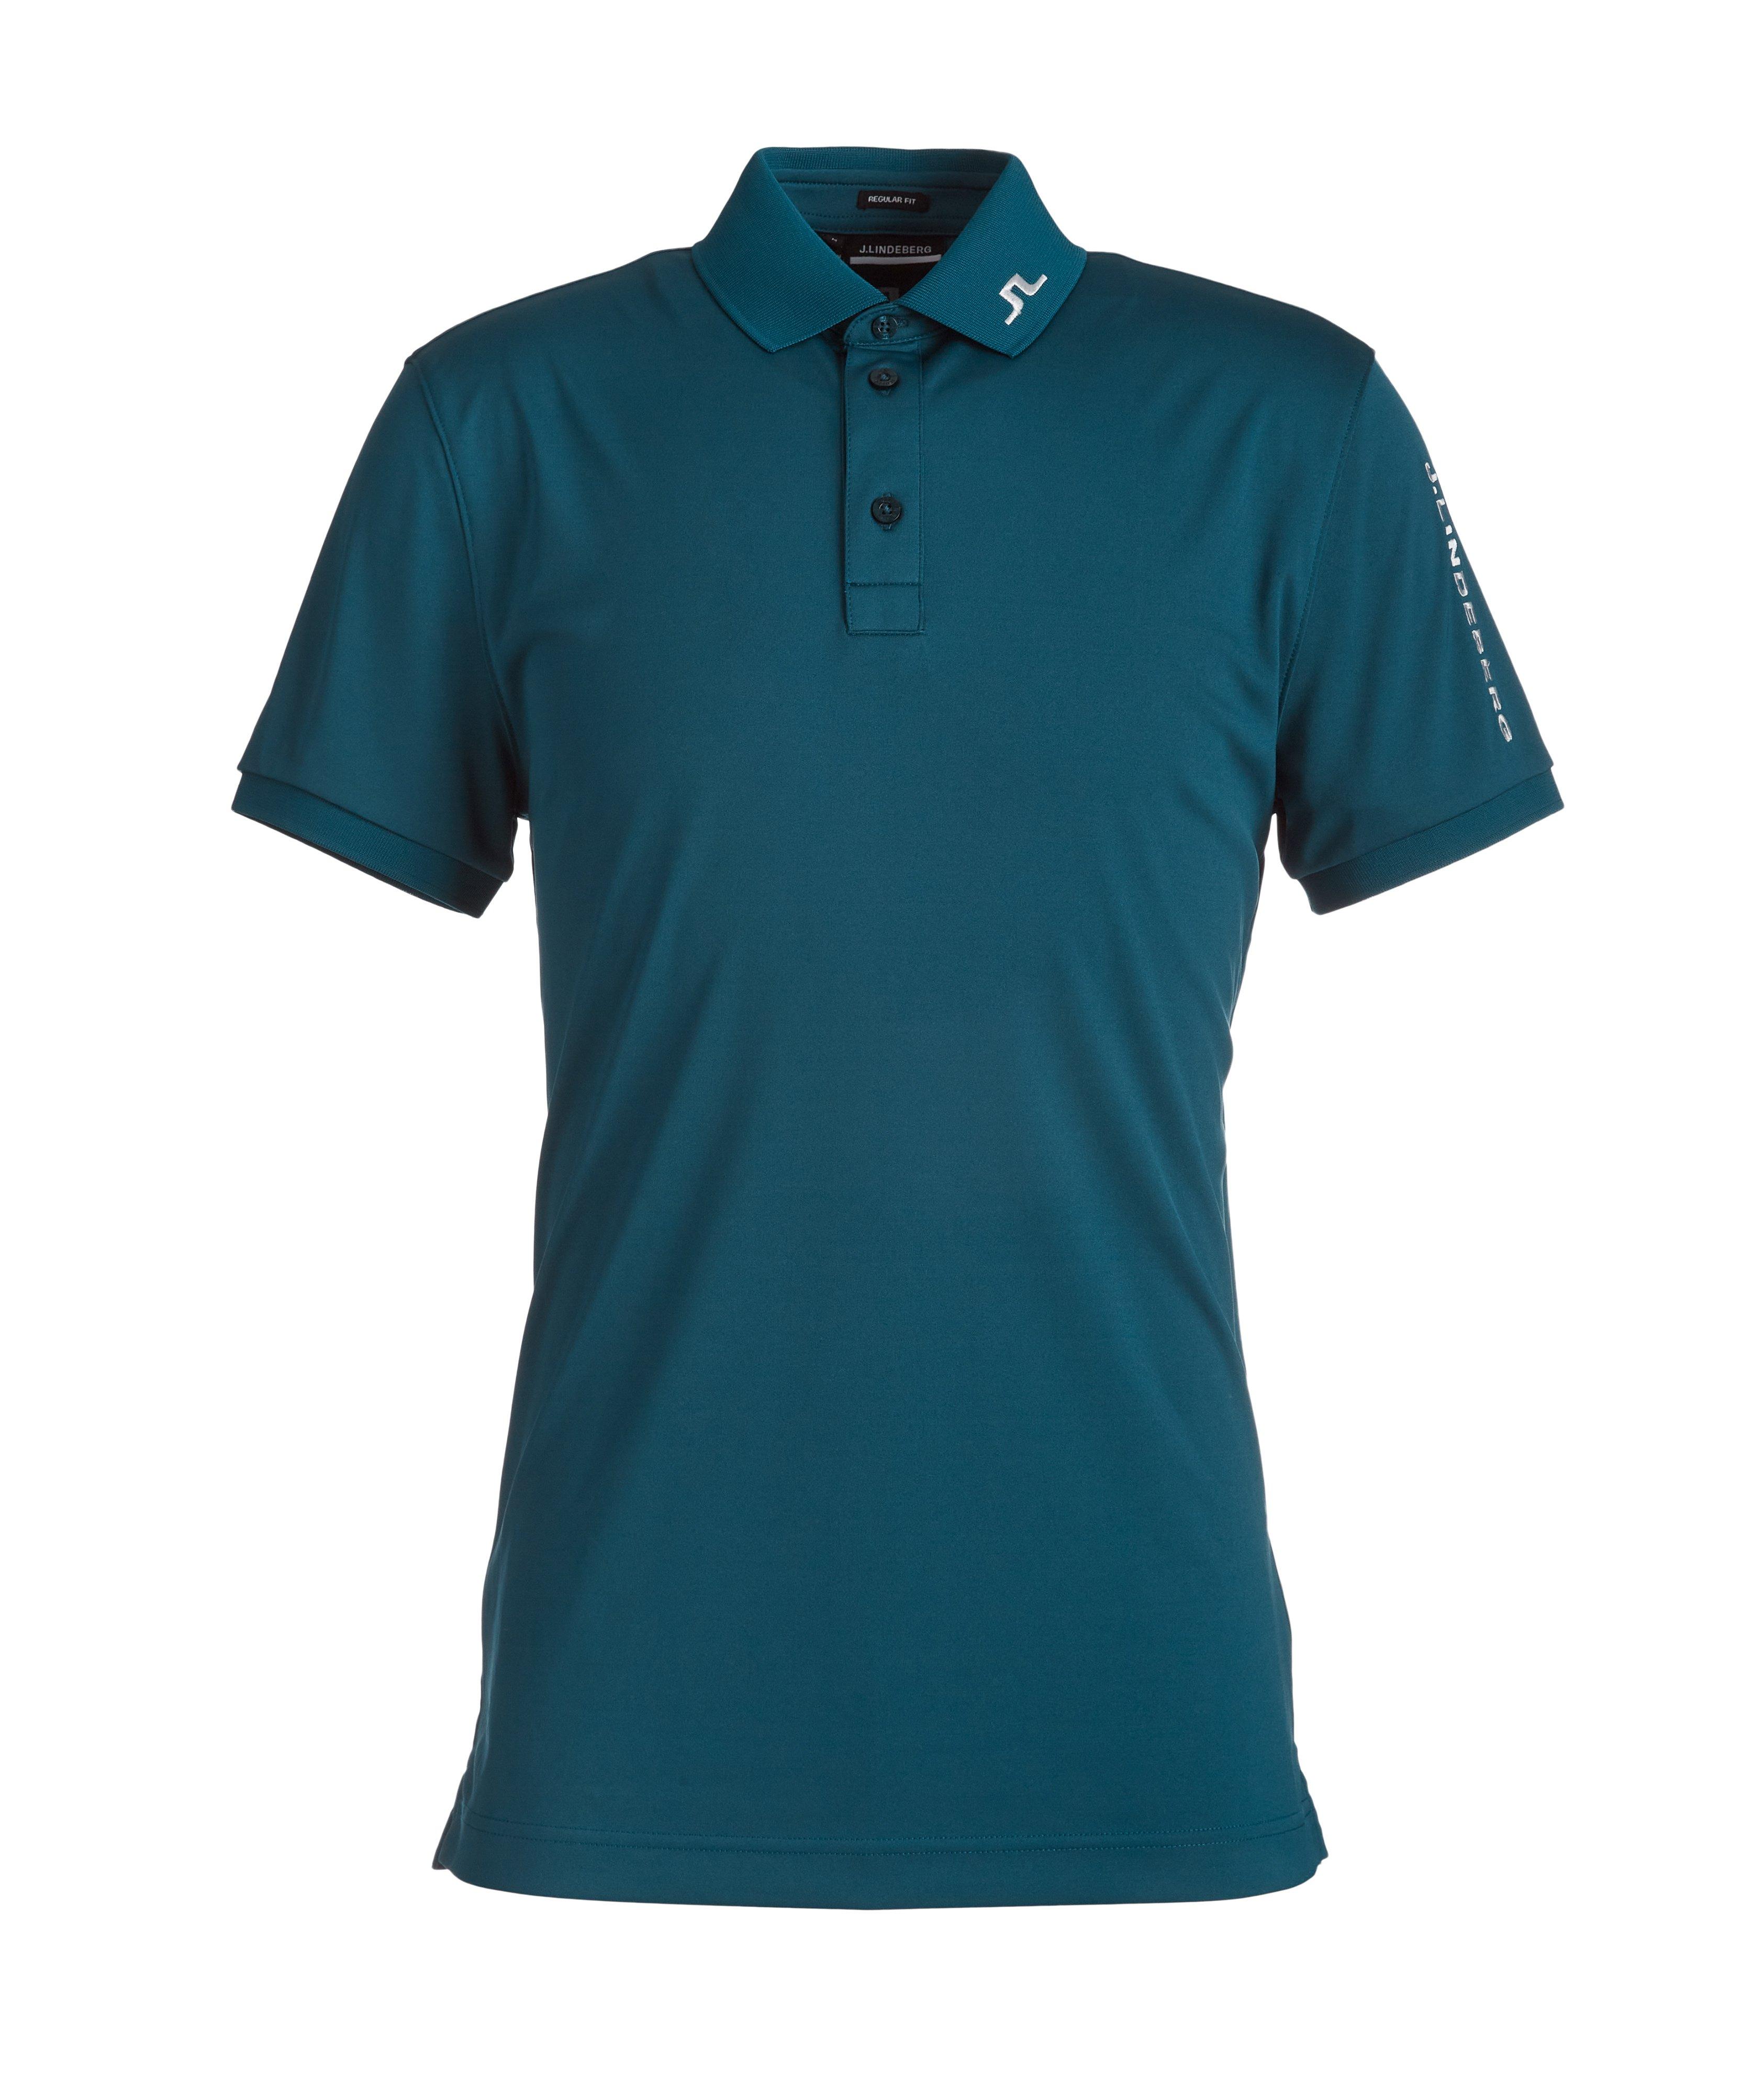 Technical Jersey Tour.0 Golf Polo image 0